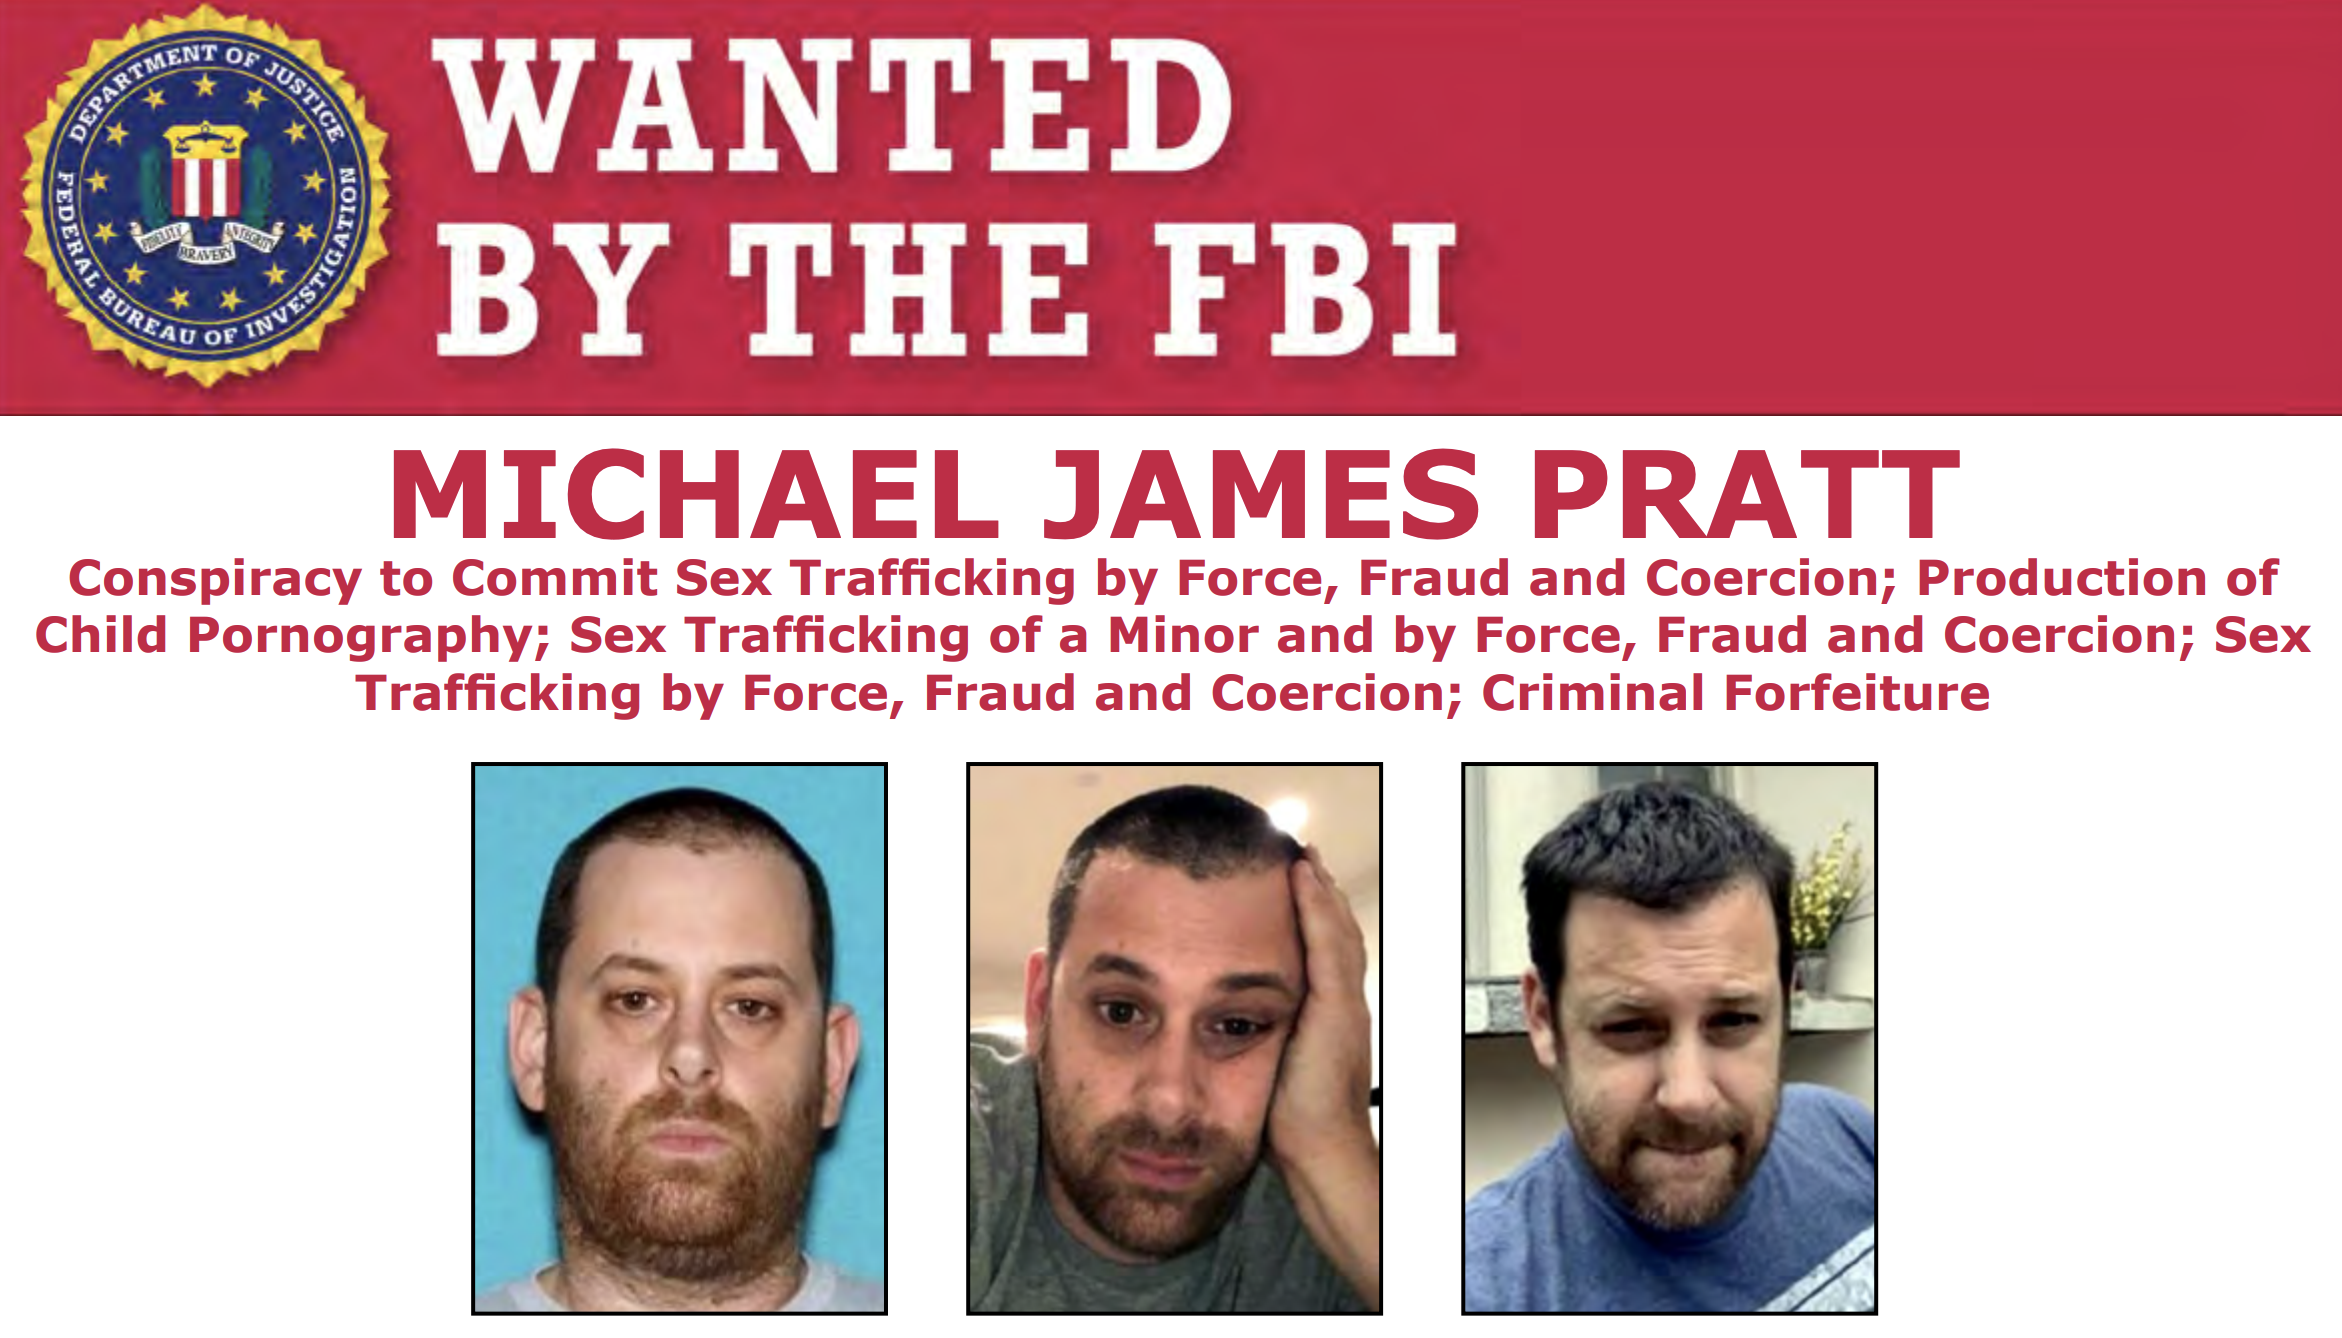 Fbi Seeking Public S Assistance To Locate Michael James Pratt Wanted For Sex Trafficking And